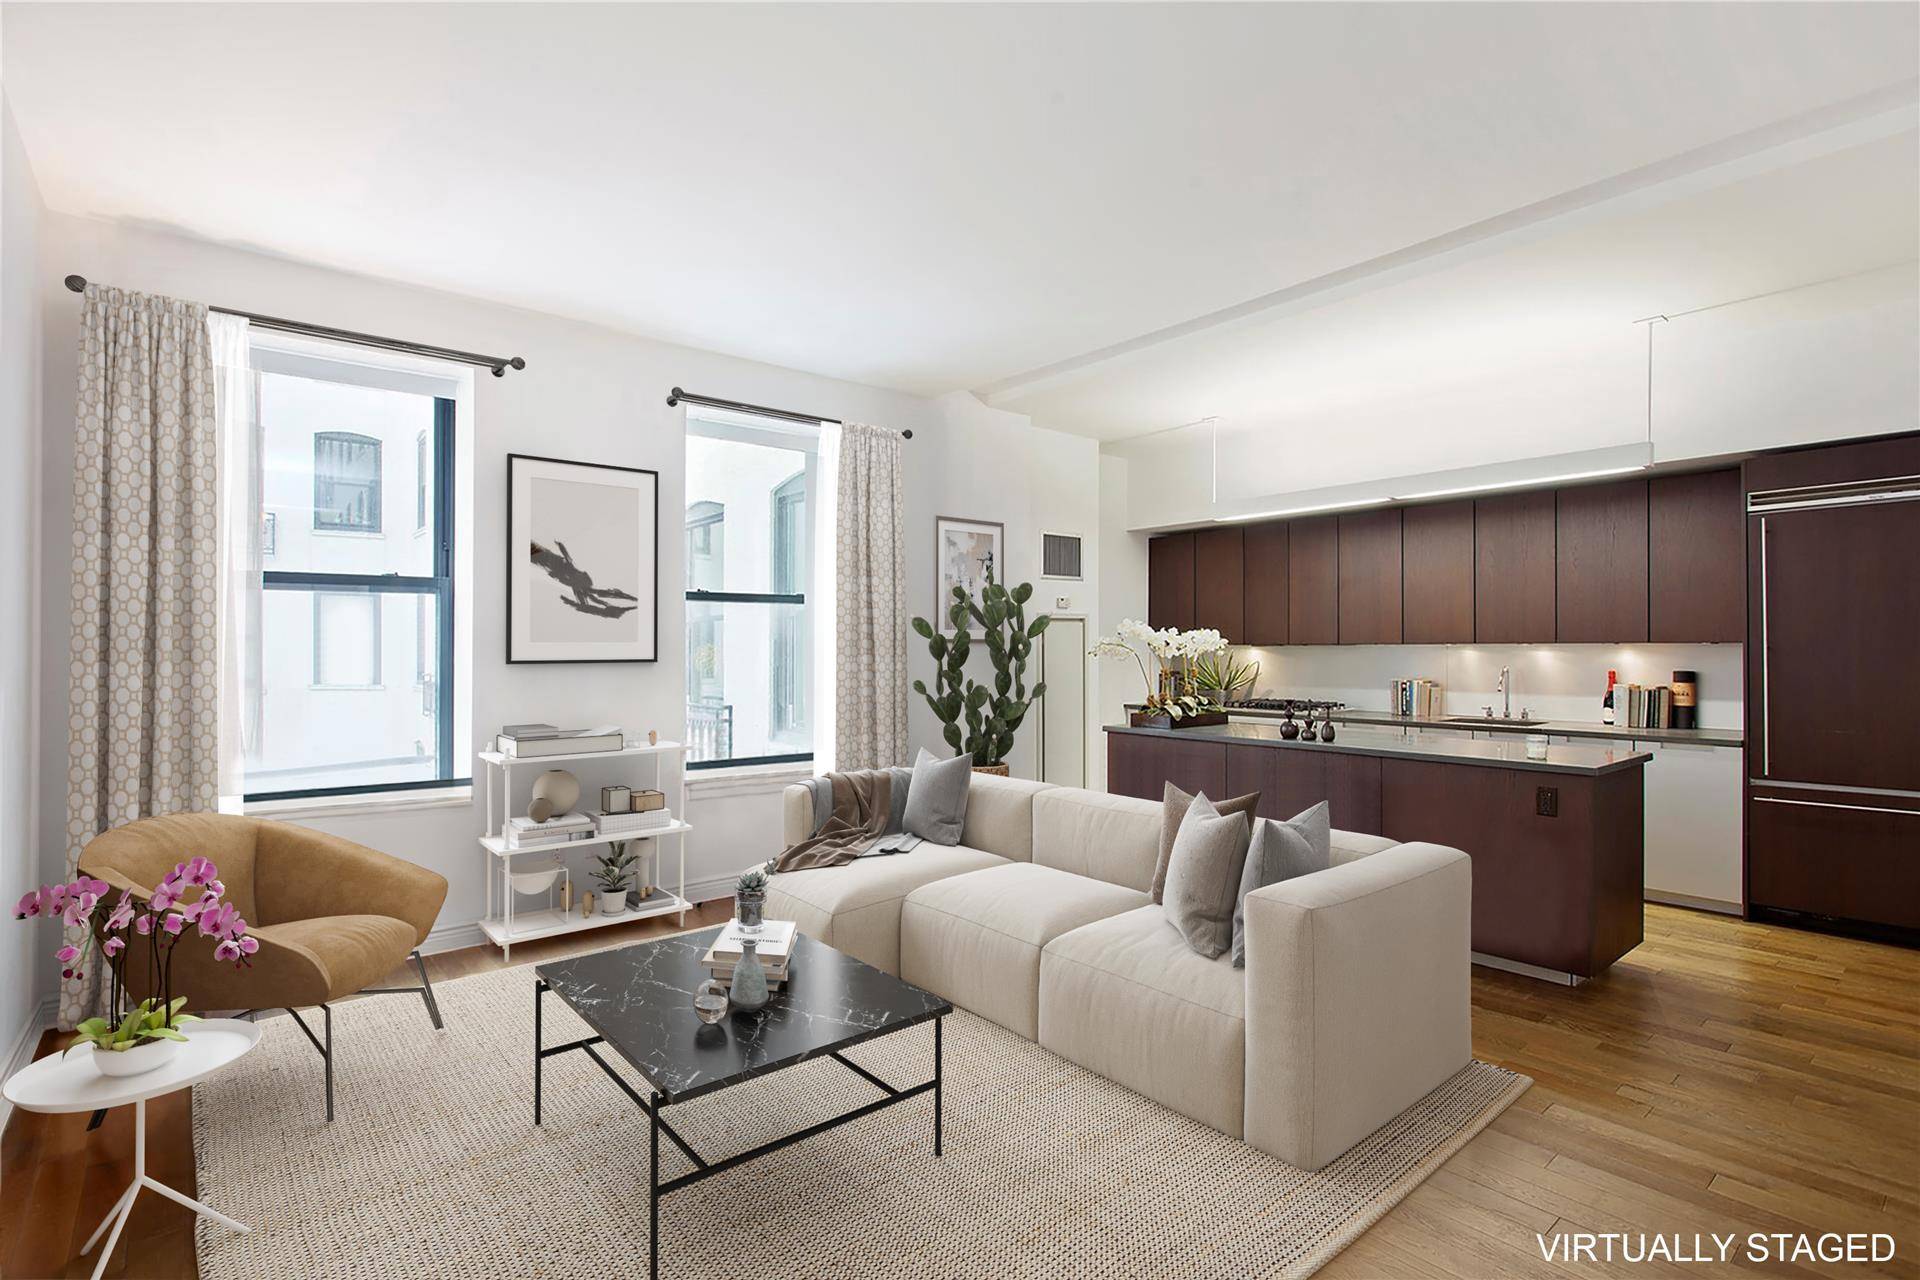 PHOTOS COMING SOON ! A bright, intimate one bedroom in one of Nomad's most desirable and architecturally distinguished addresses, 225 Fifth Avenue is a classic prewar New York building with ...